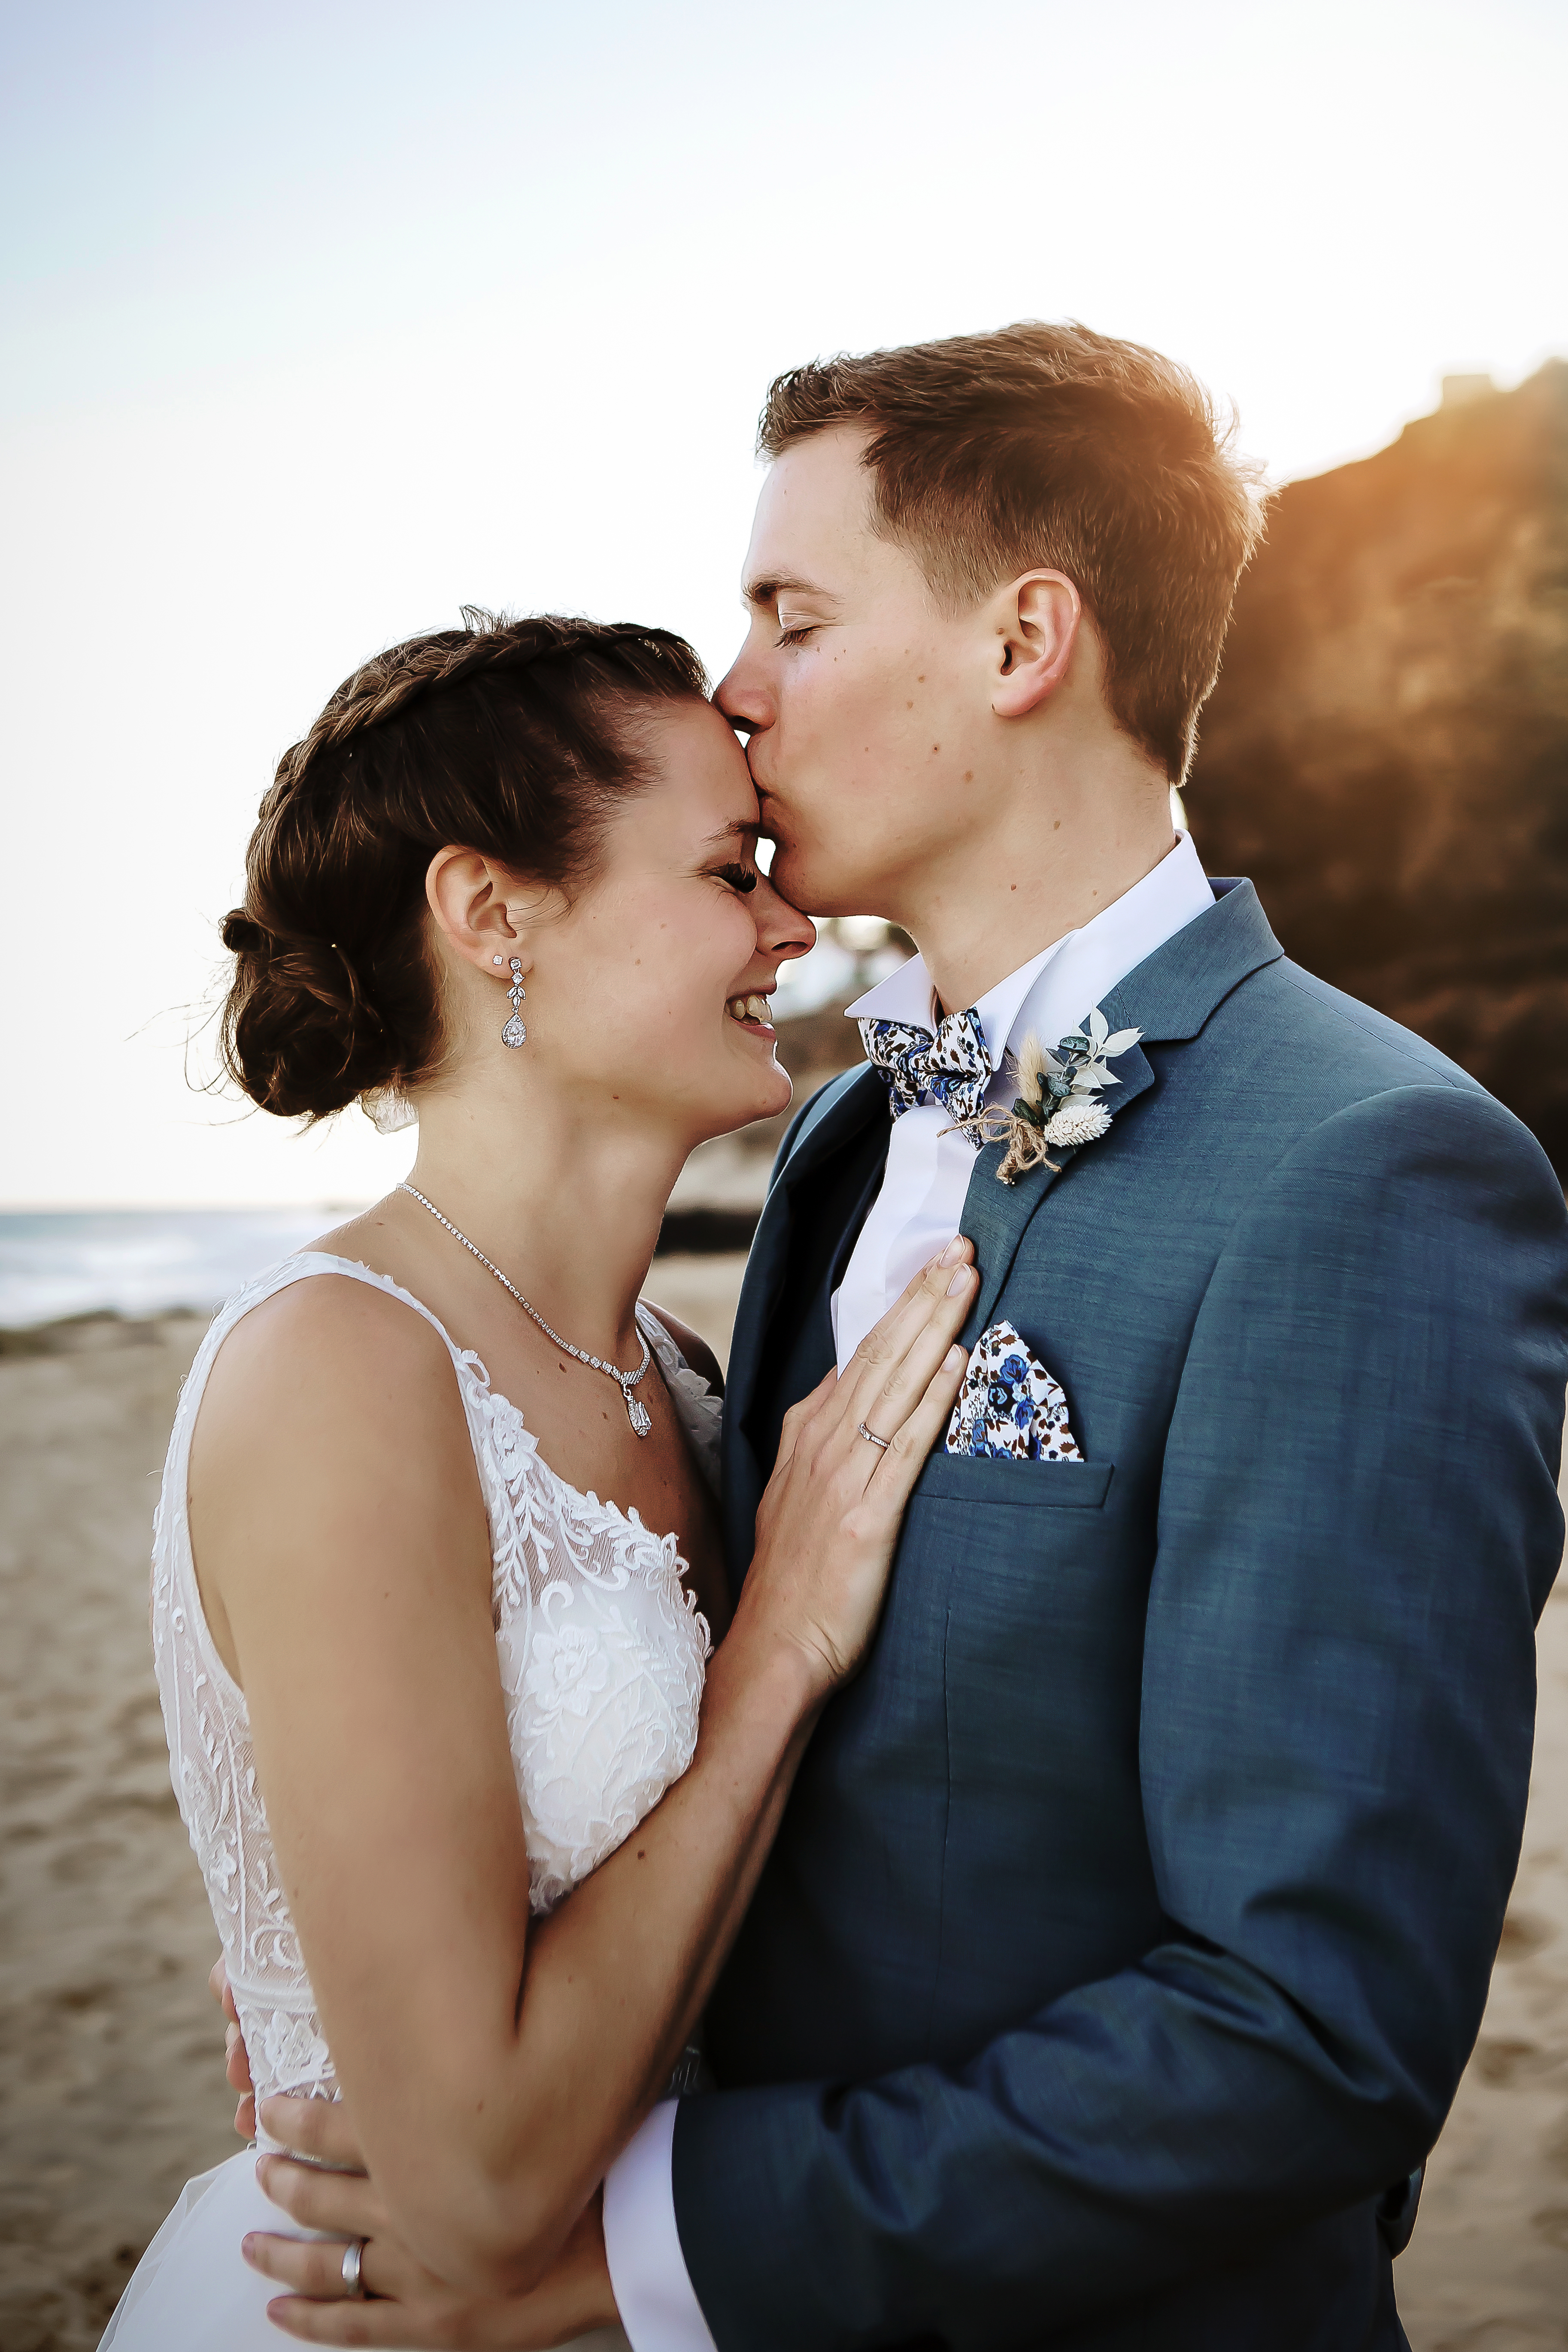 Groom passionately kiss the forhead of the bride in the beach of Fuerteventura